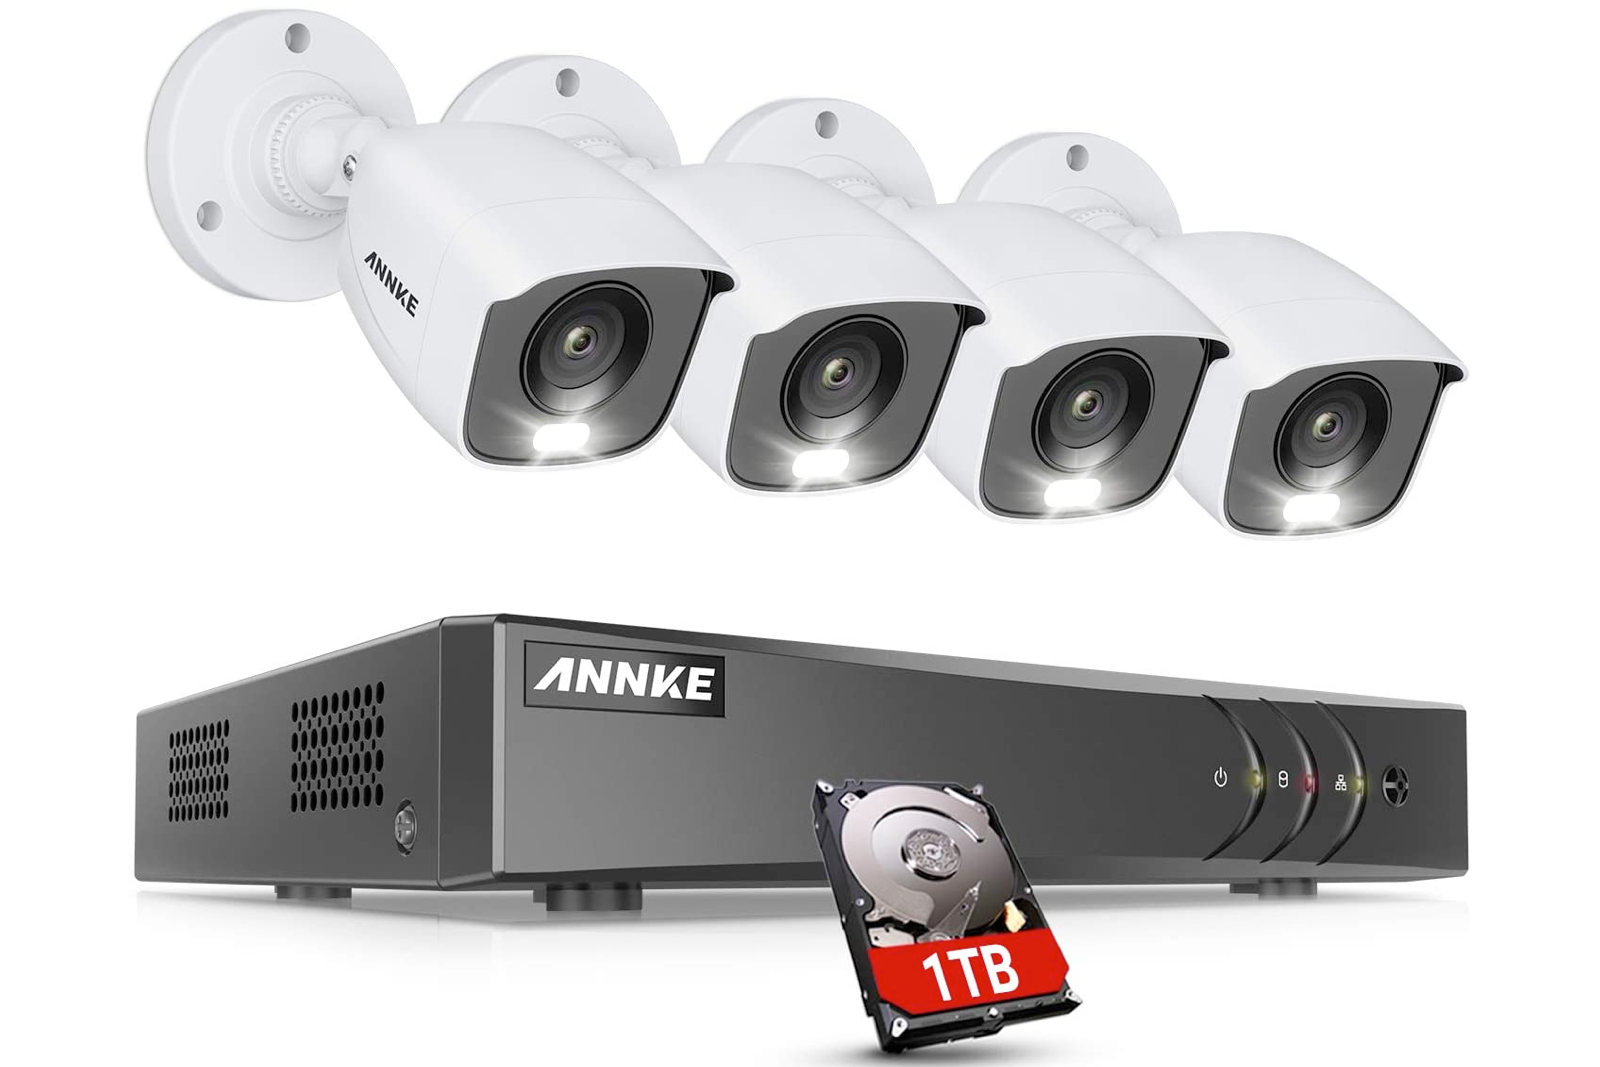 Annke home security deals for Prime Day photo 13